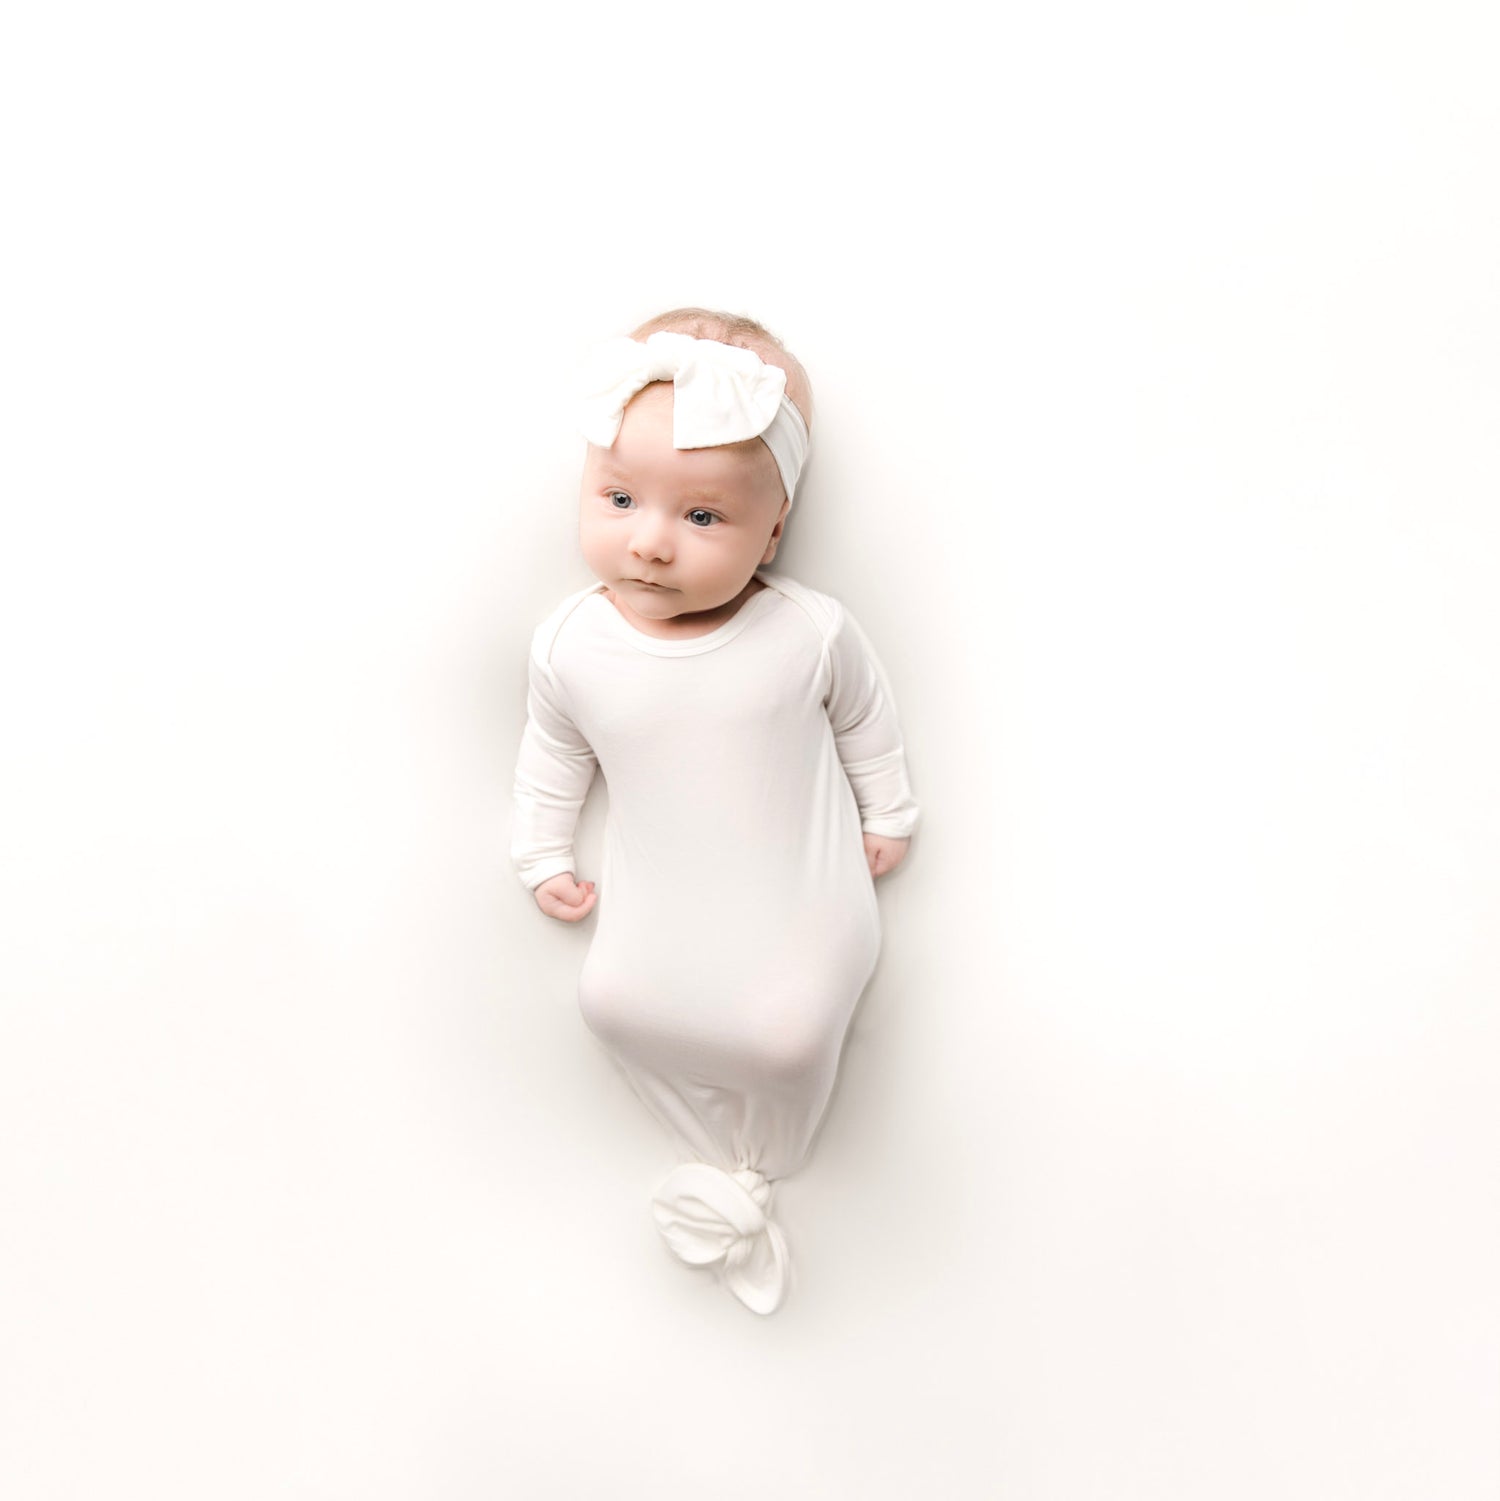 Baby girl wearing neutral baby clothes